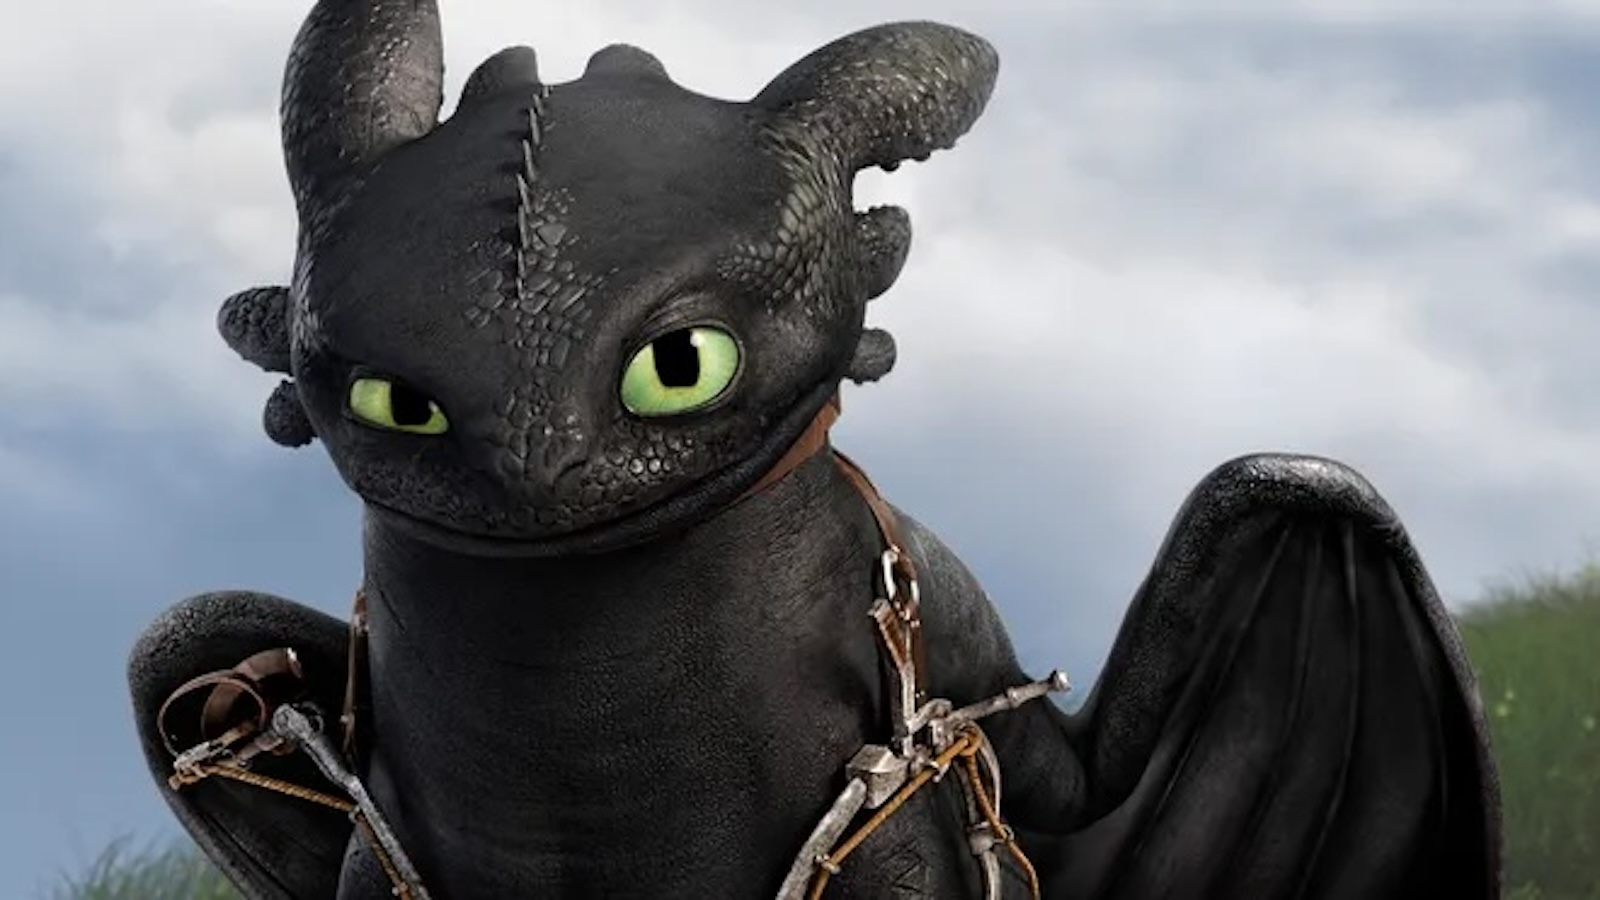 LOOK: 'How To Train Your Dragon' live-action finds its Hiccup and